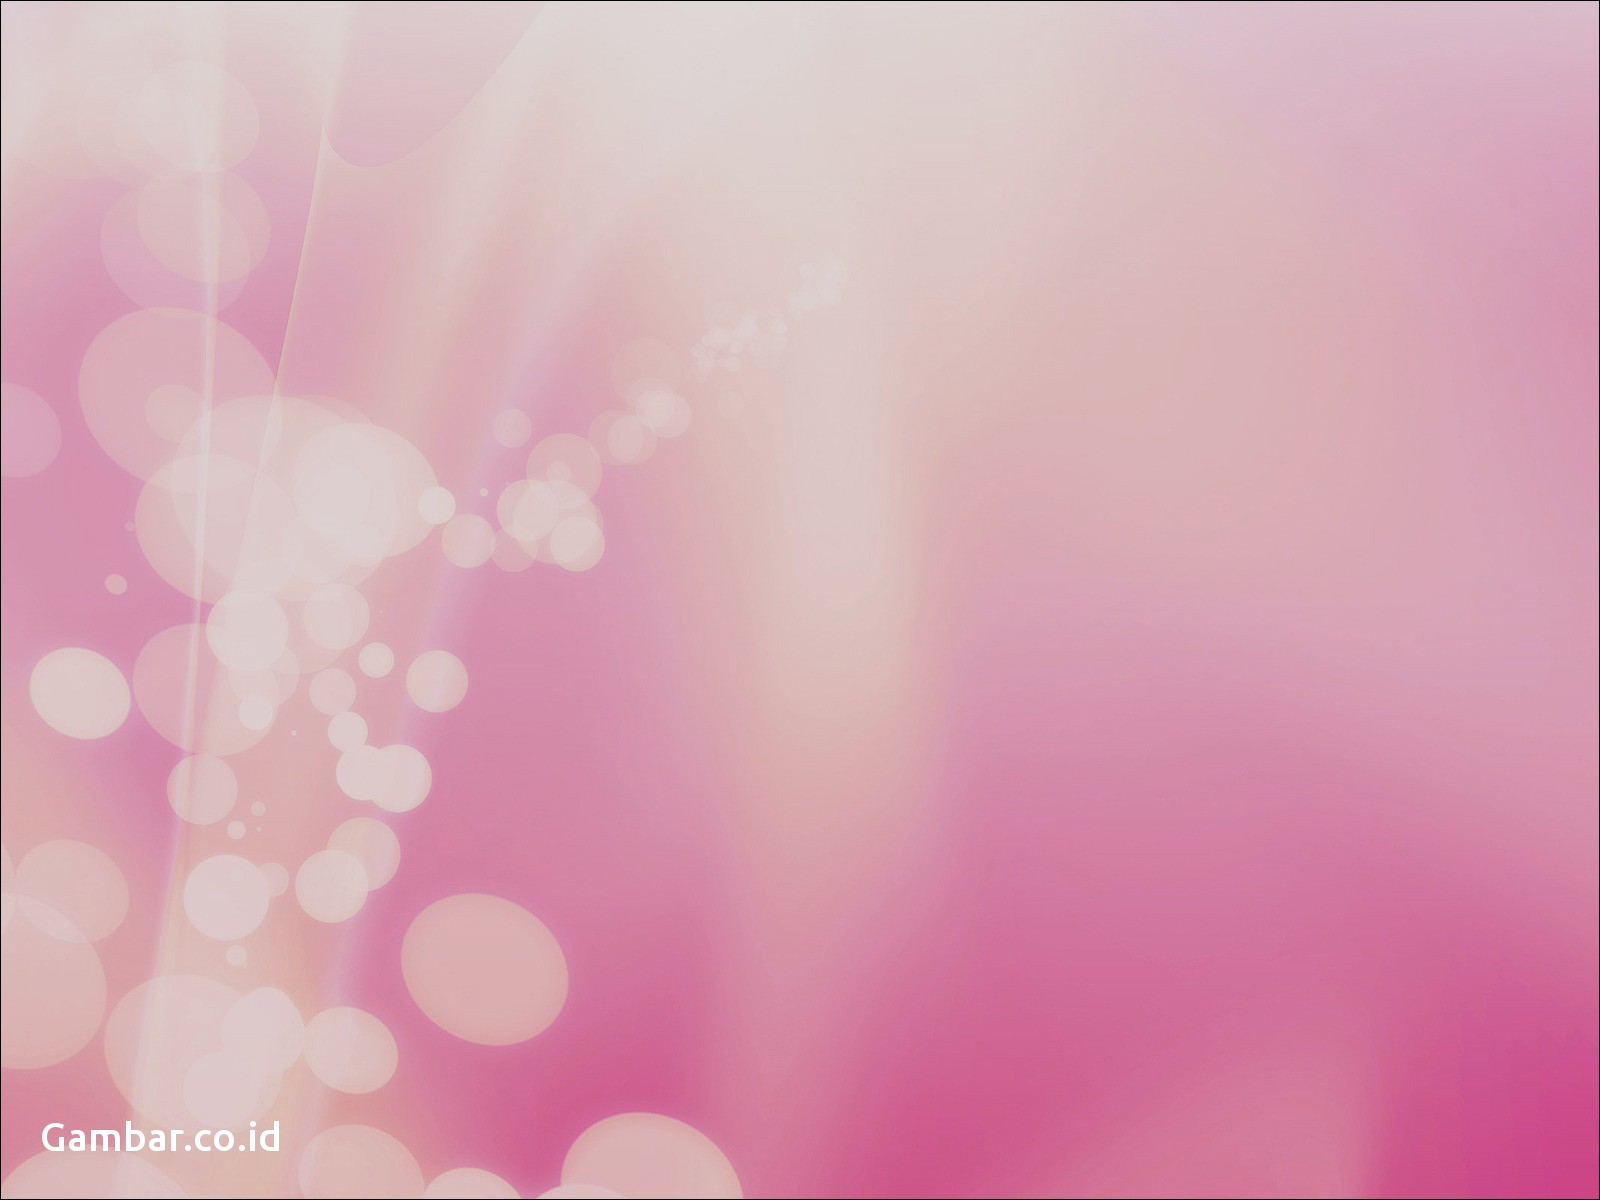 Light Colour Background Hd Png - HD Wallpaper 